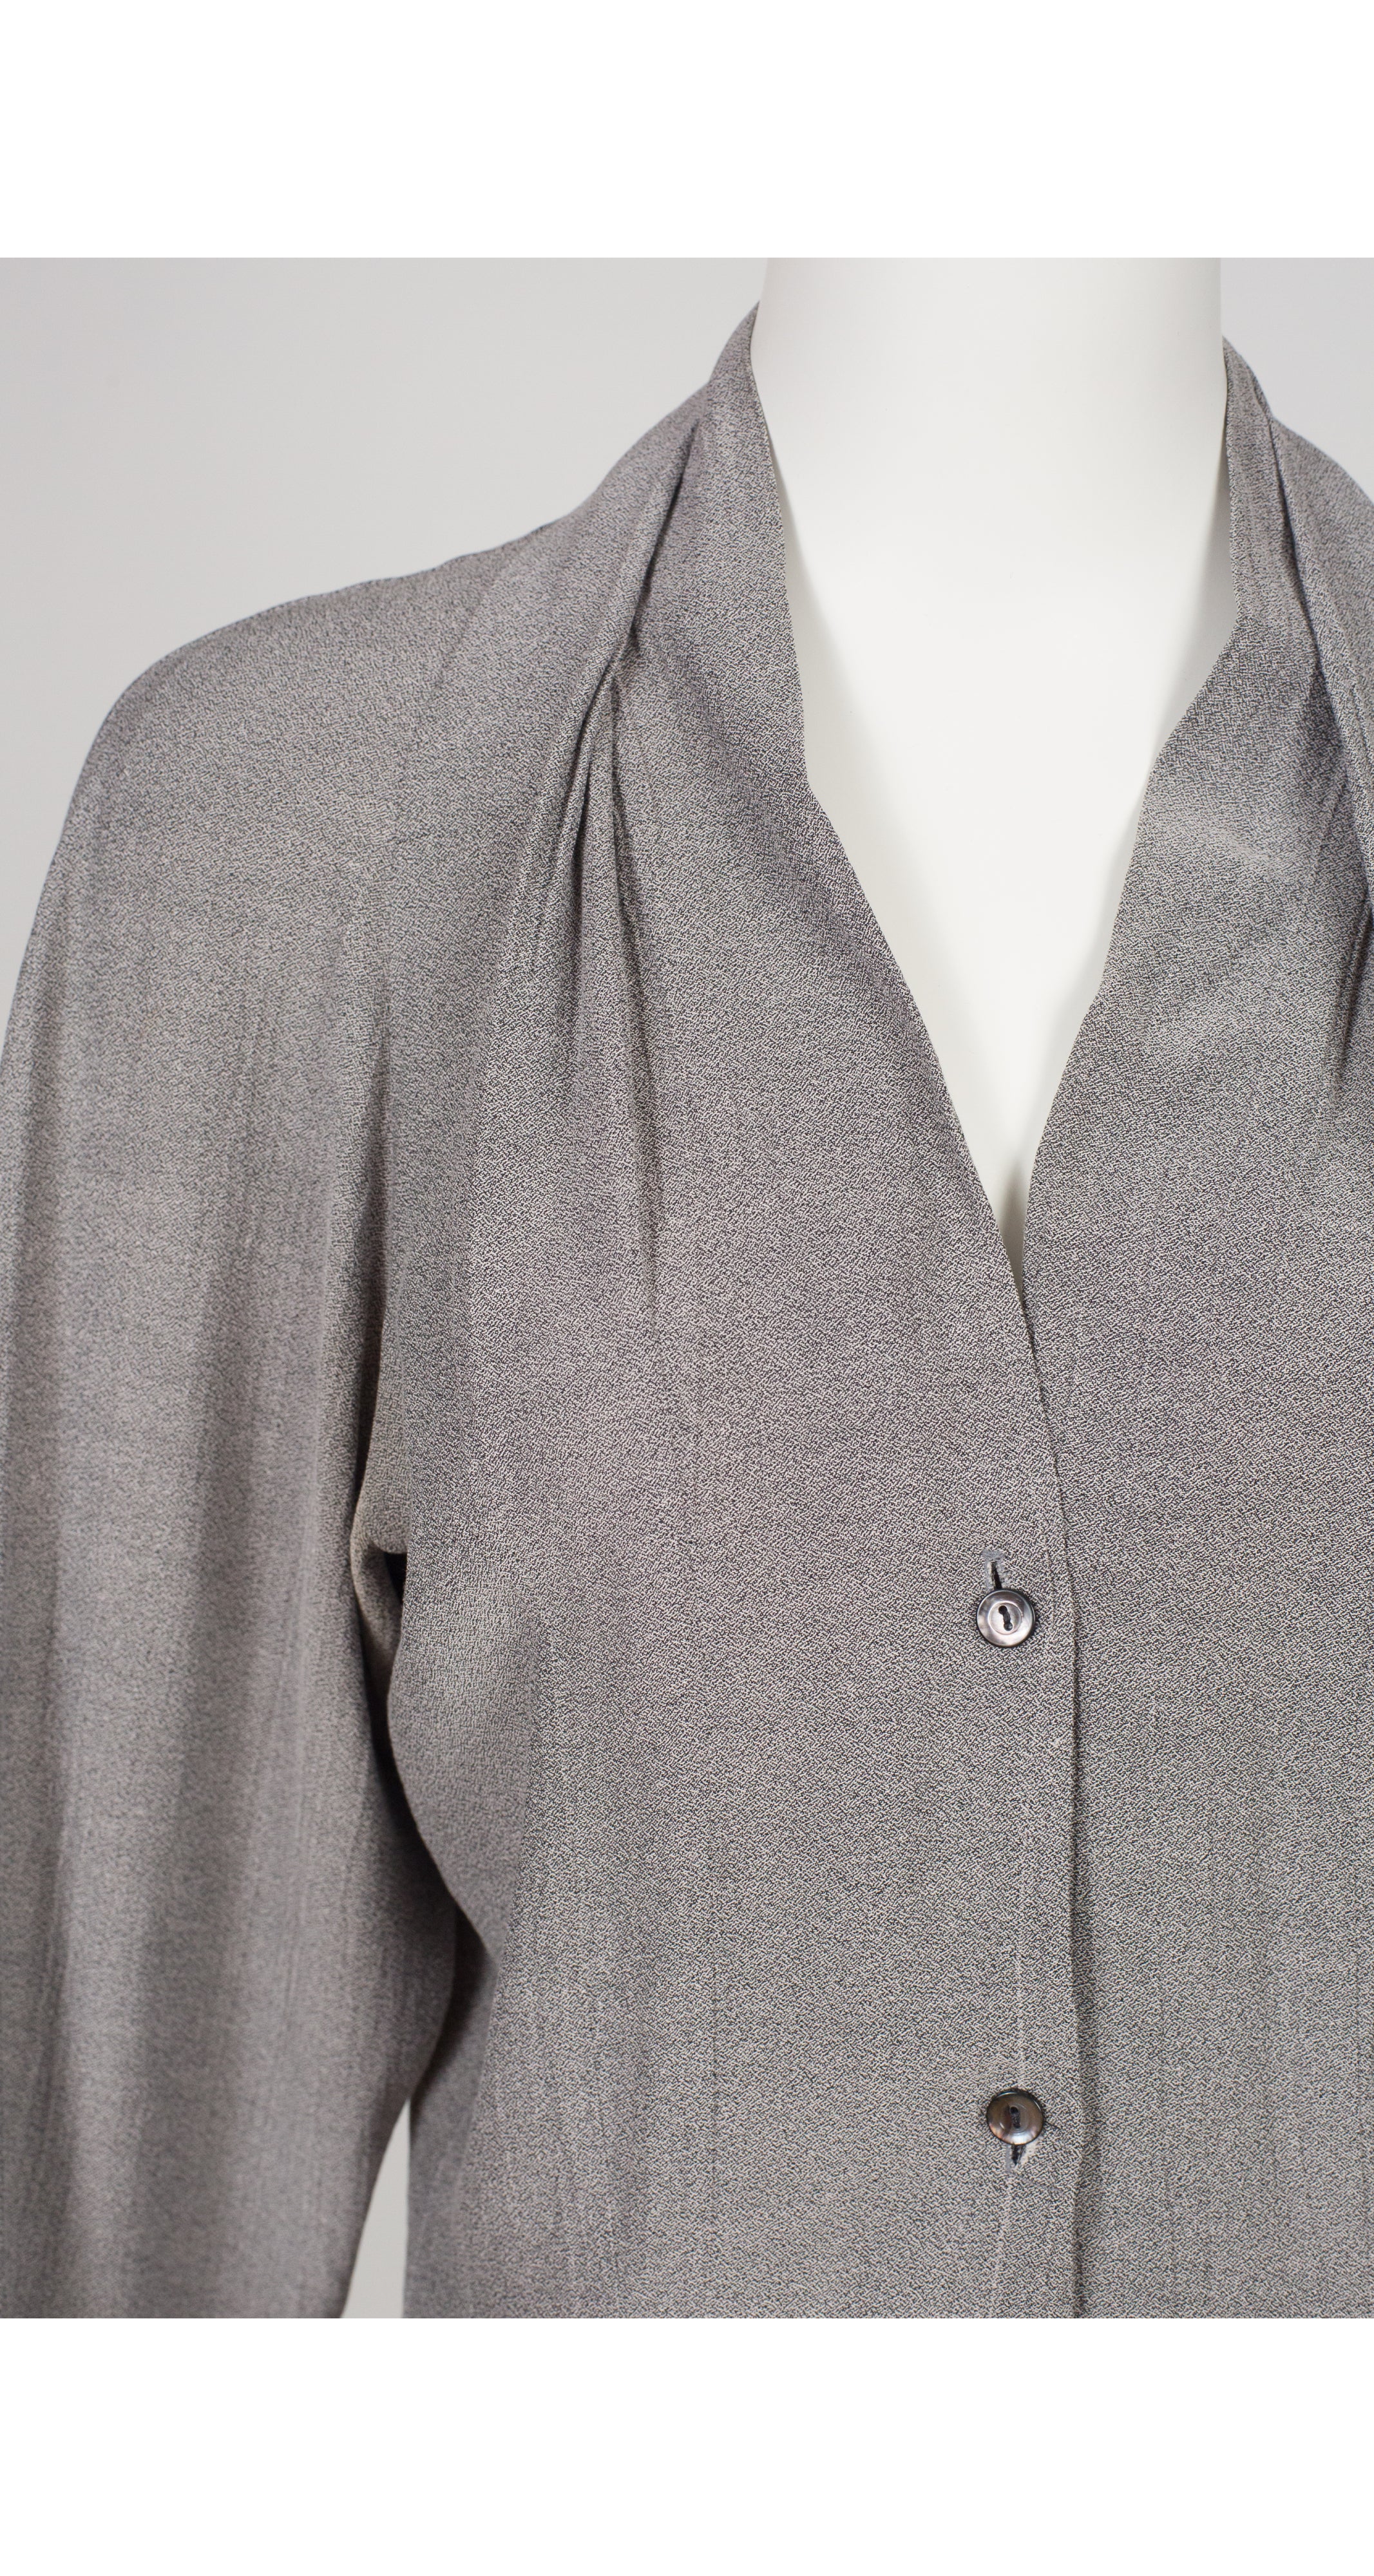 1987-88 F/W "The Rose" Collection Gray Light Jacket